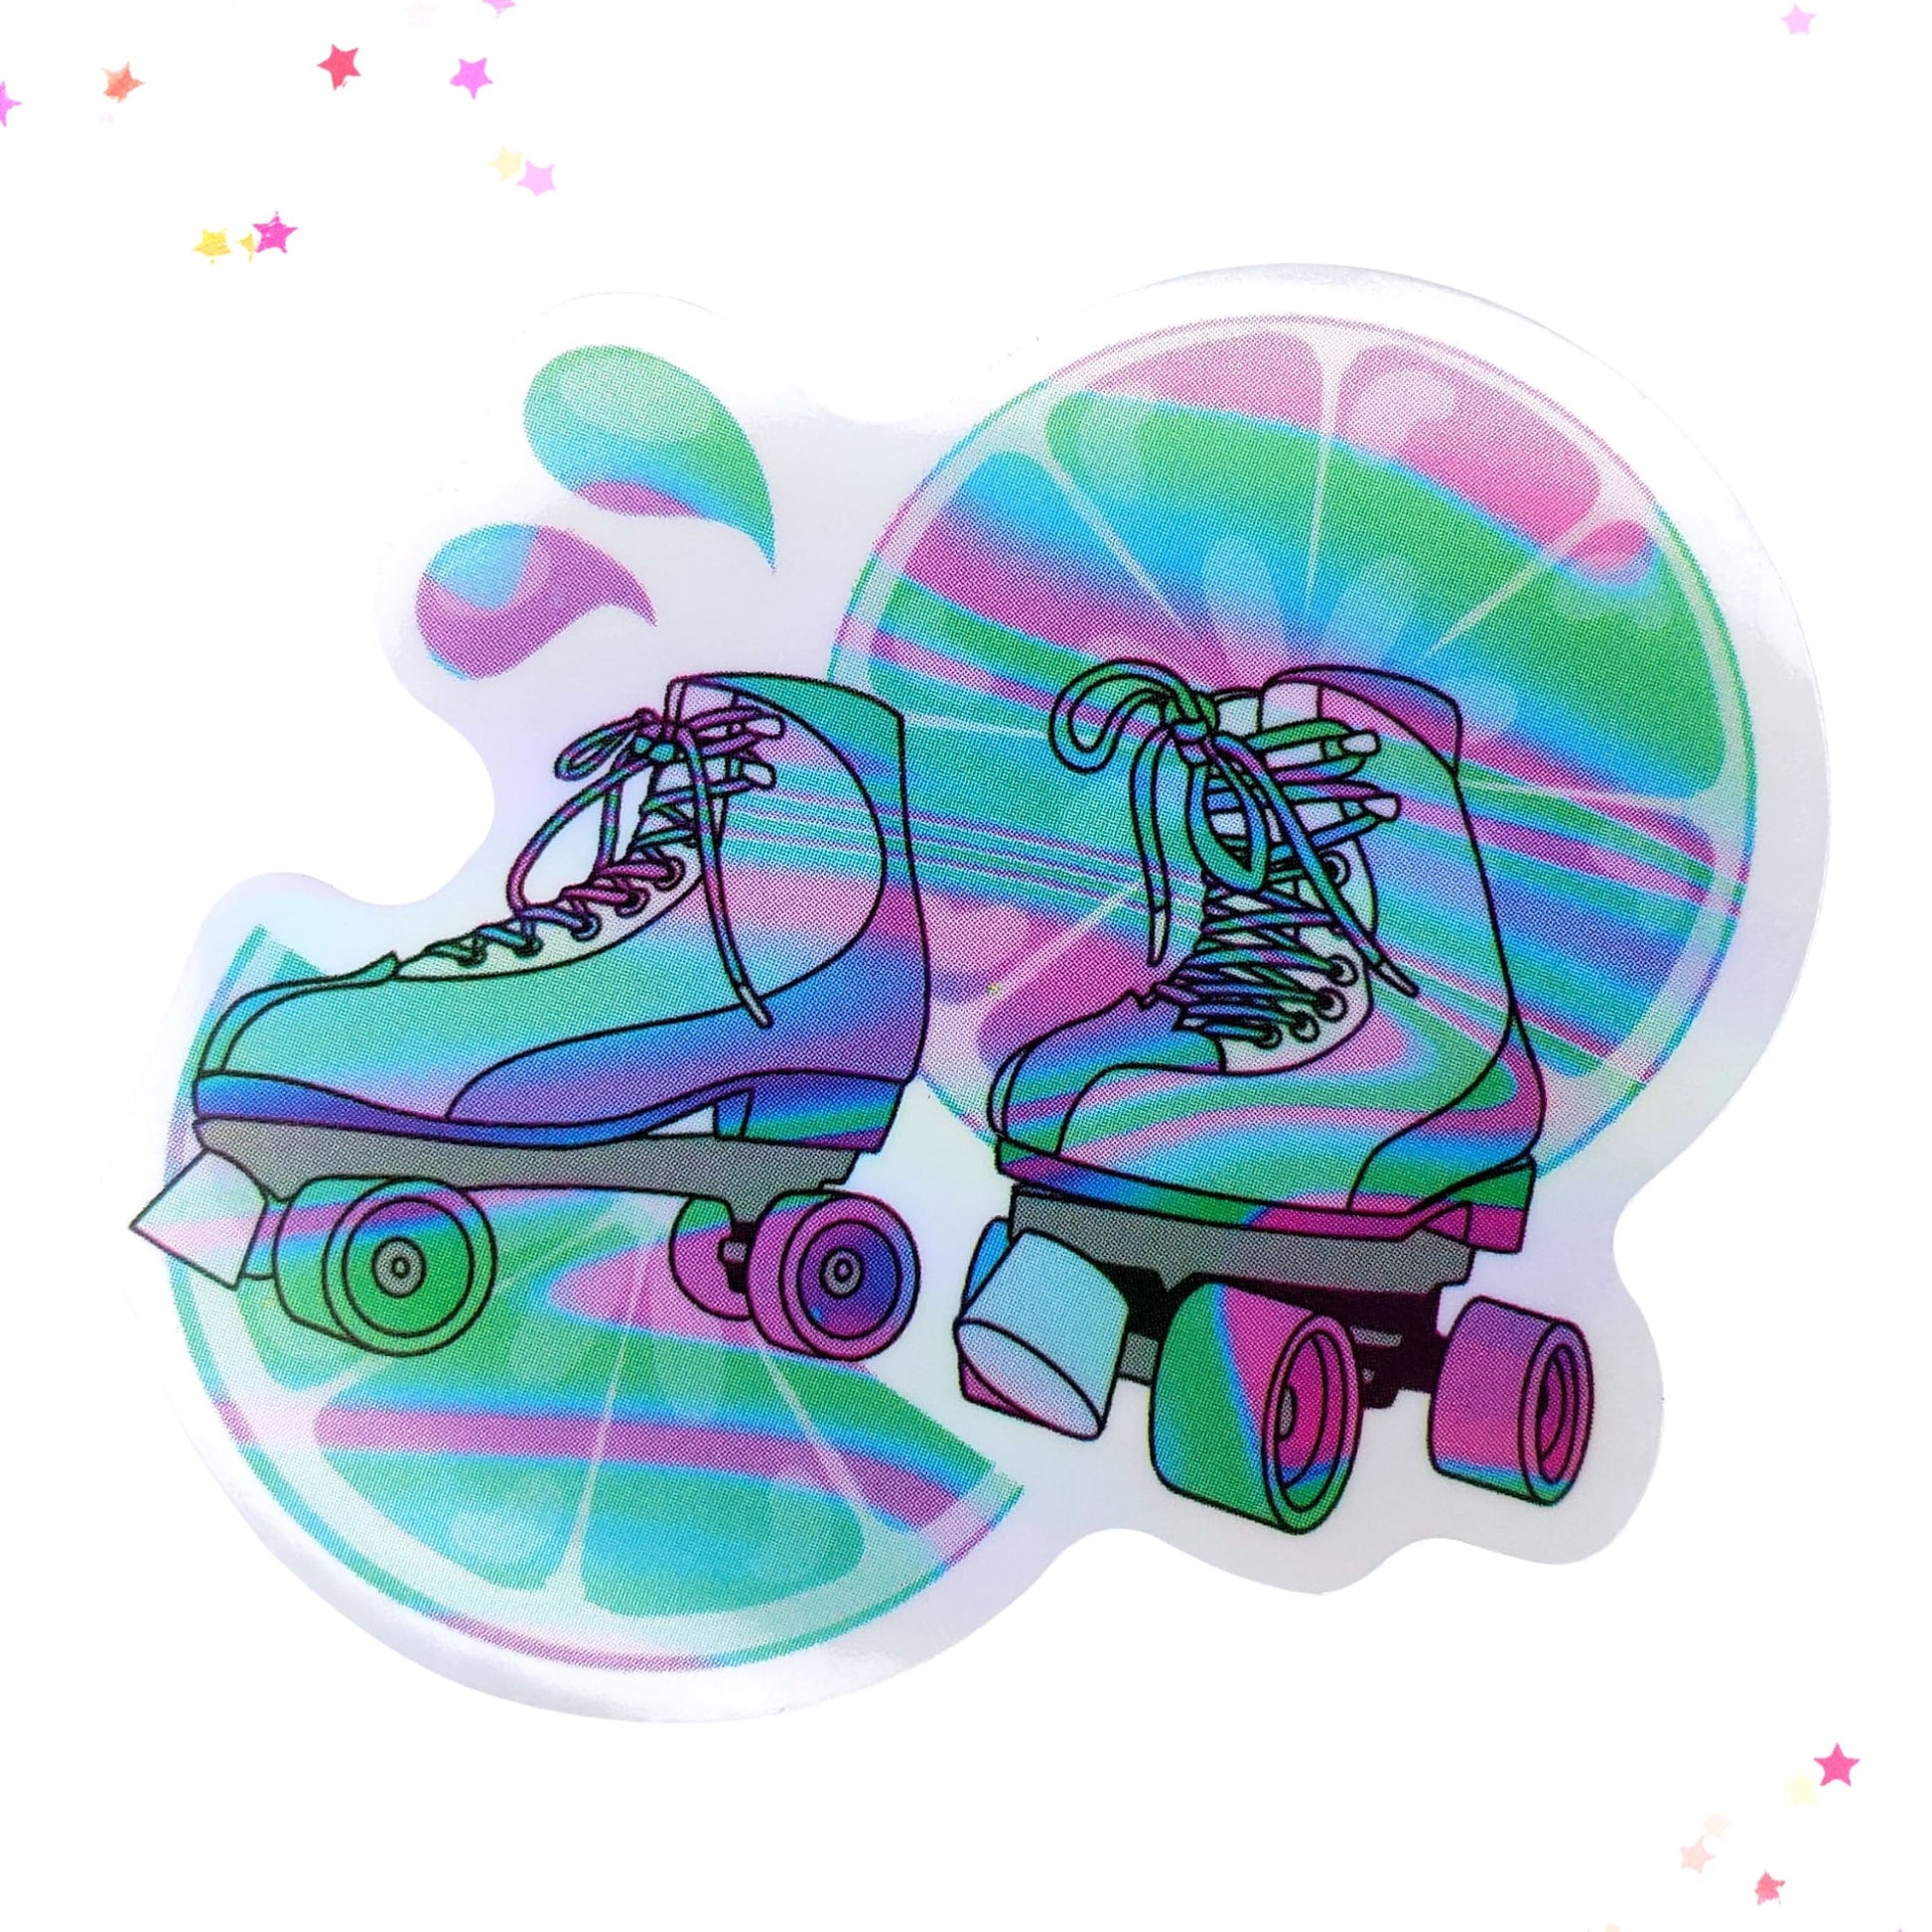 Blue Green Purple Juicy Fruit Roller Skates Waterproof Holographic Sticker from Confetti Kitty, Only 1.0